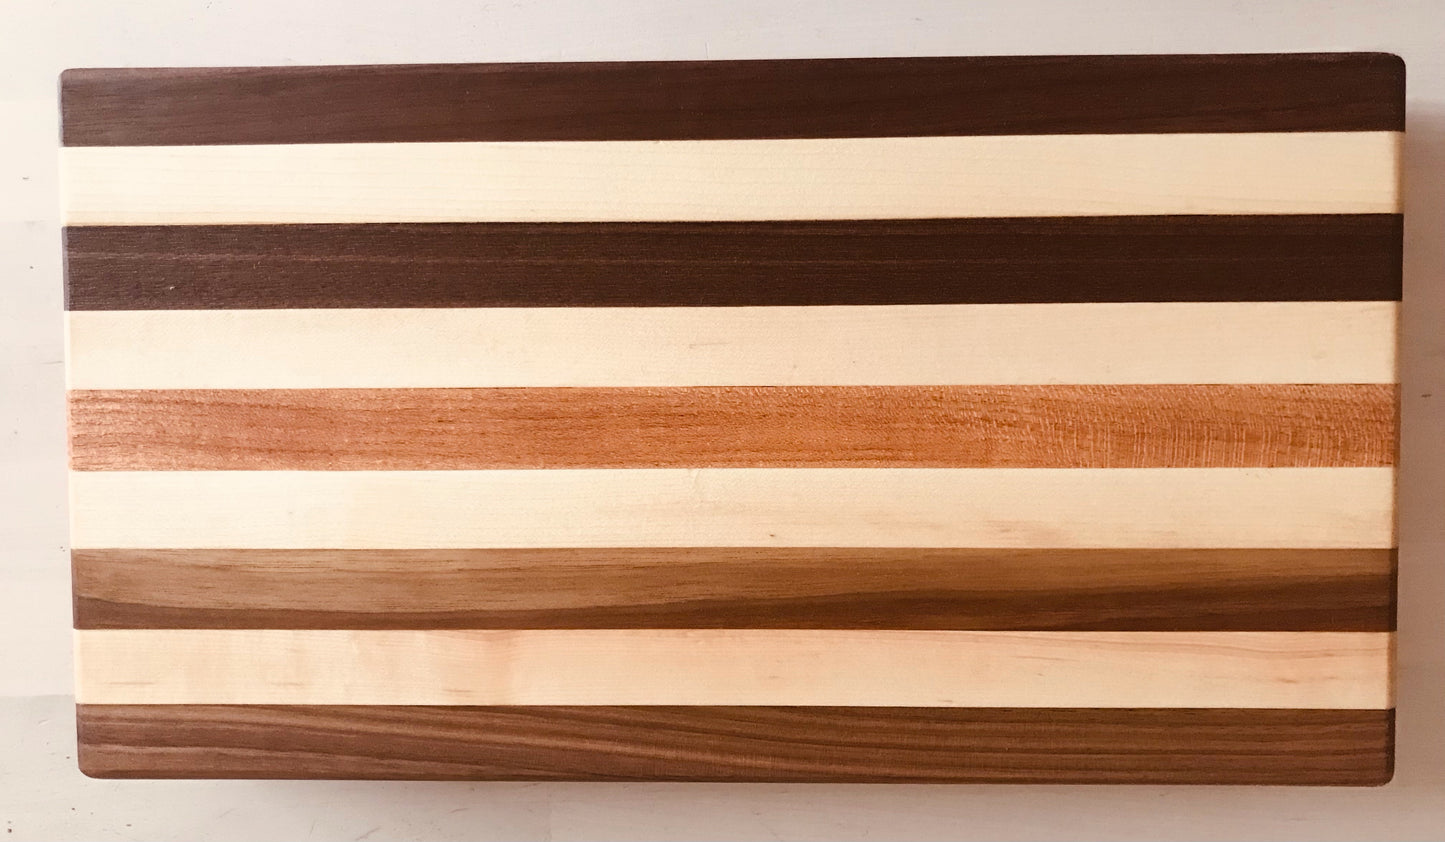 "Grounded" Long Grain Cutting Board